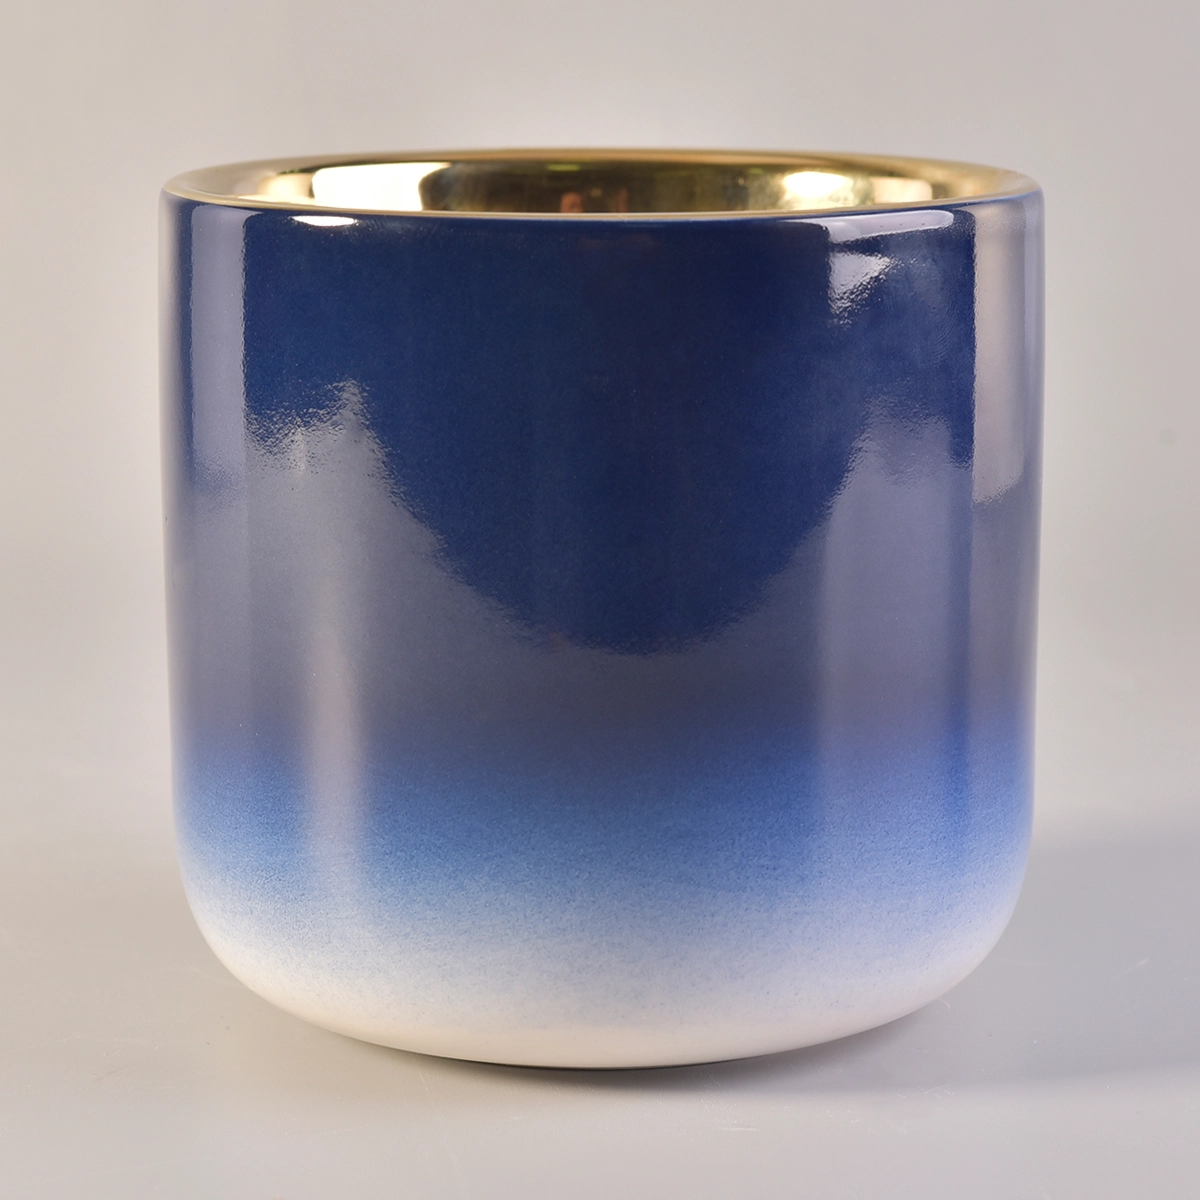 Christmas Gradient Blue Candle Ceramic Vessels With Gold Plating